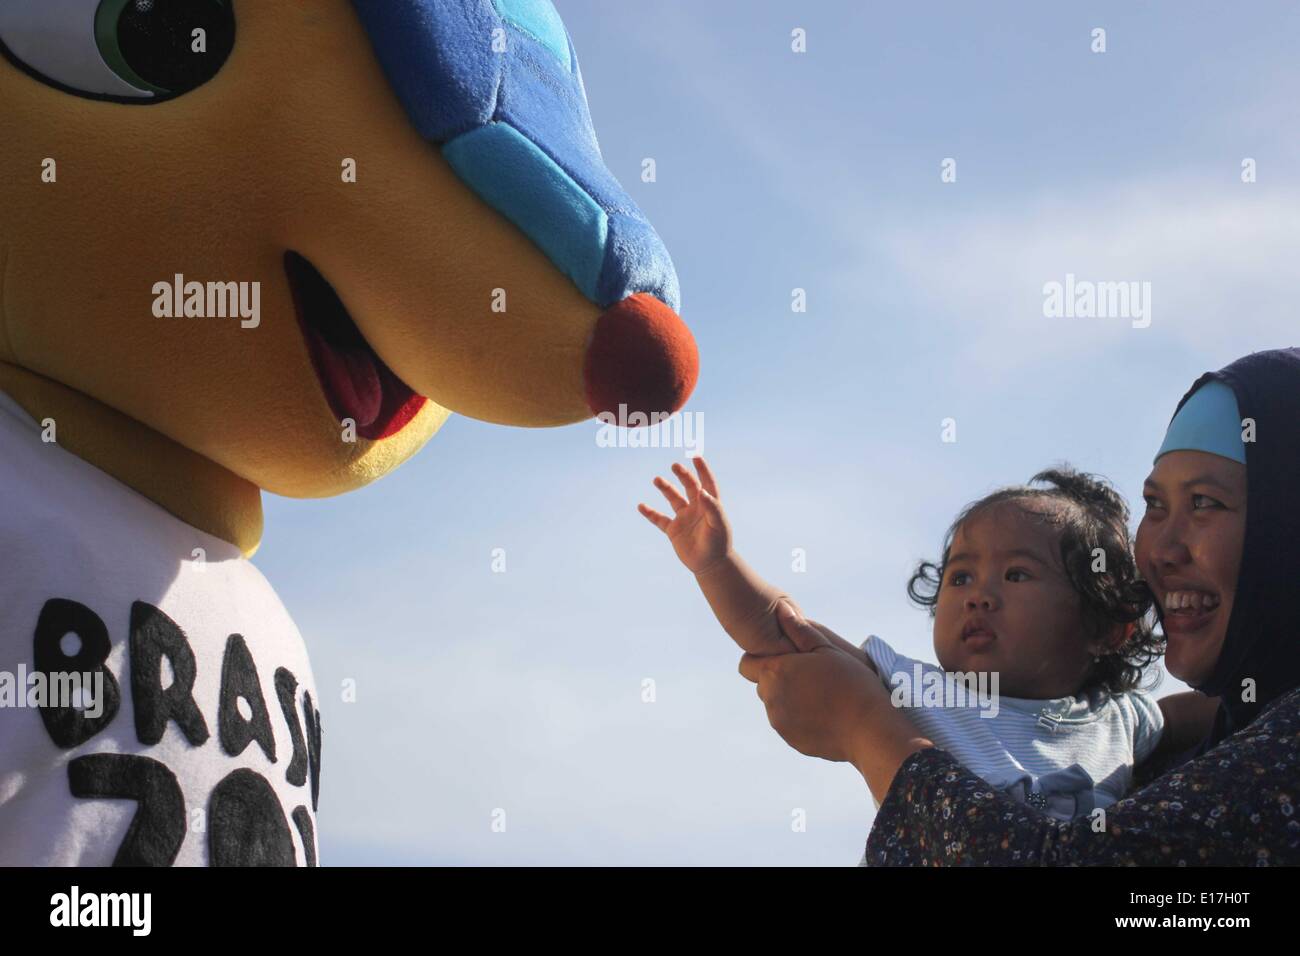 Semarang, Central Java, Indonesia. 25th May, 2014. SEMARANG, CENTRAL JAVA, INDONESIA - MAY 25: A girl touch Armadillo, the 2014 World Cup mascot, to welcome the 2014 FIFA World Cup, International men's football tournament scheduled to take place in Brazil from 12 June to 13 July 2014, in Semarang, Central Java, Indonesia on May 25, 2014. Credit:  Sijori Images/ZUMAPRESS.com/Alamy Live News Stock Photo